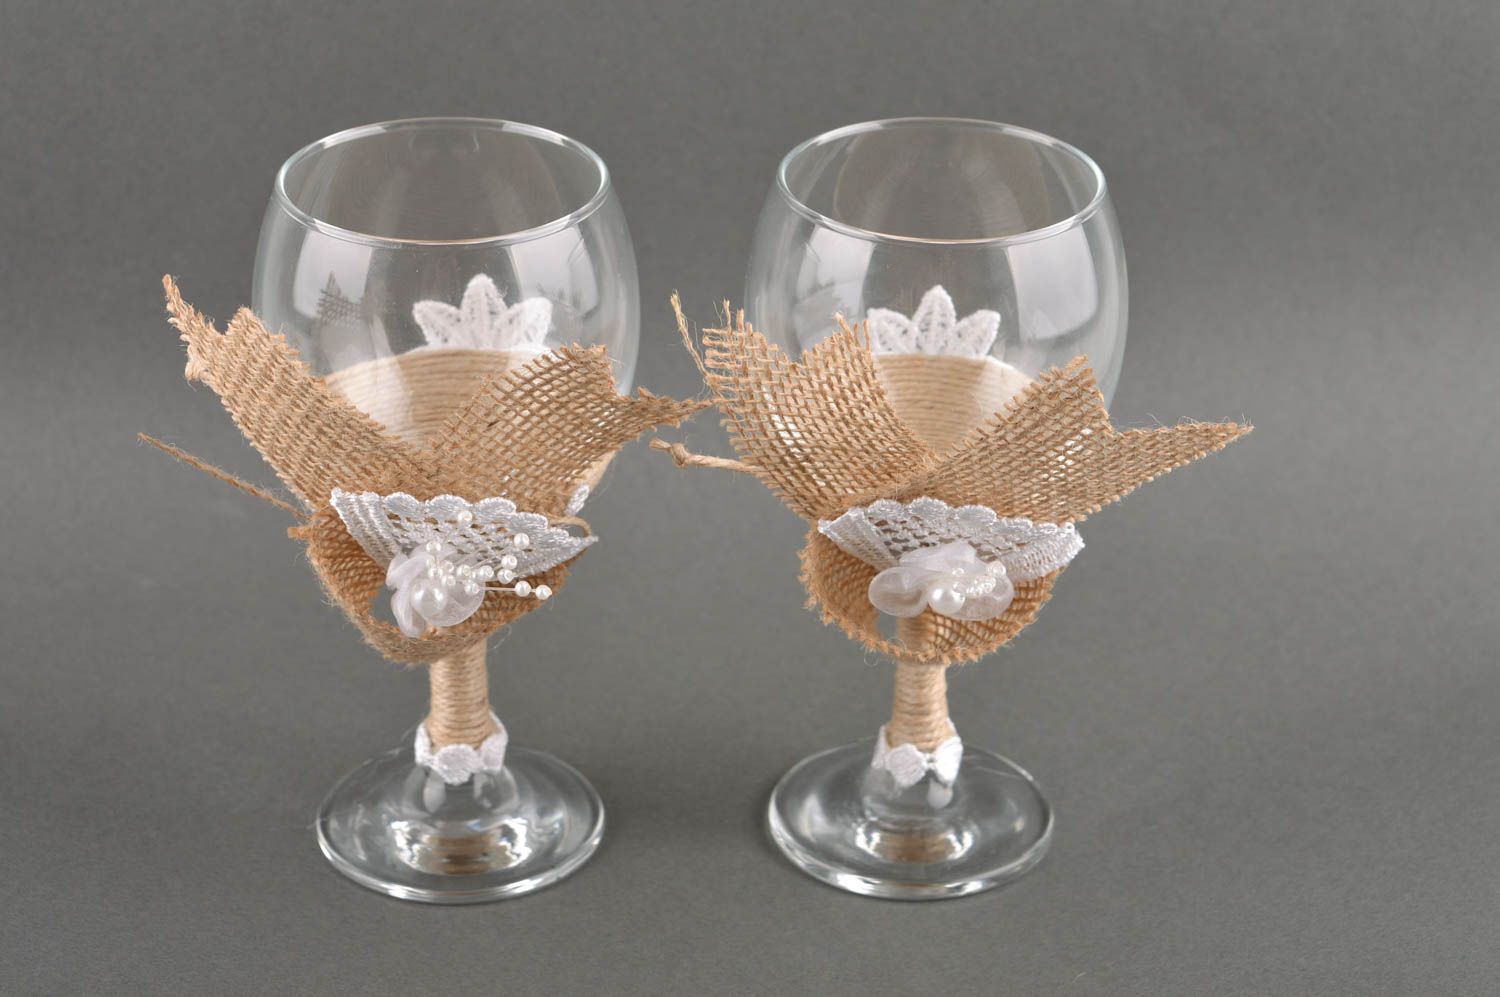 66 Amazing Wedding Glass Decorations For Your Table